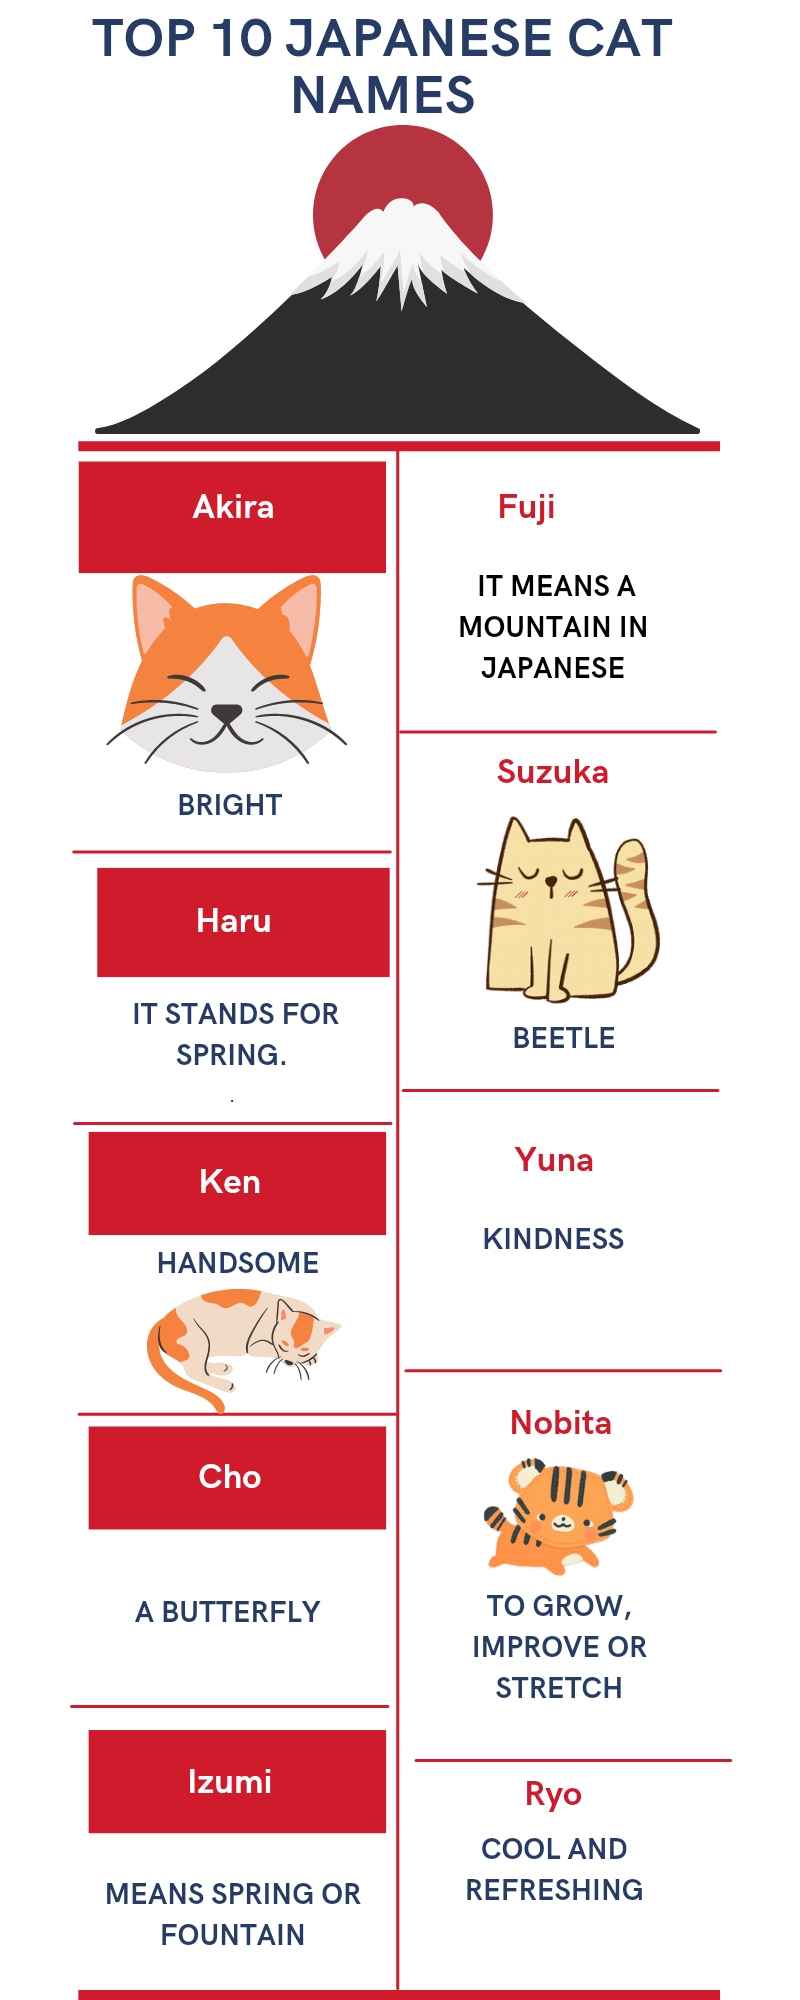 Popular Japanese cat names Infographic 